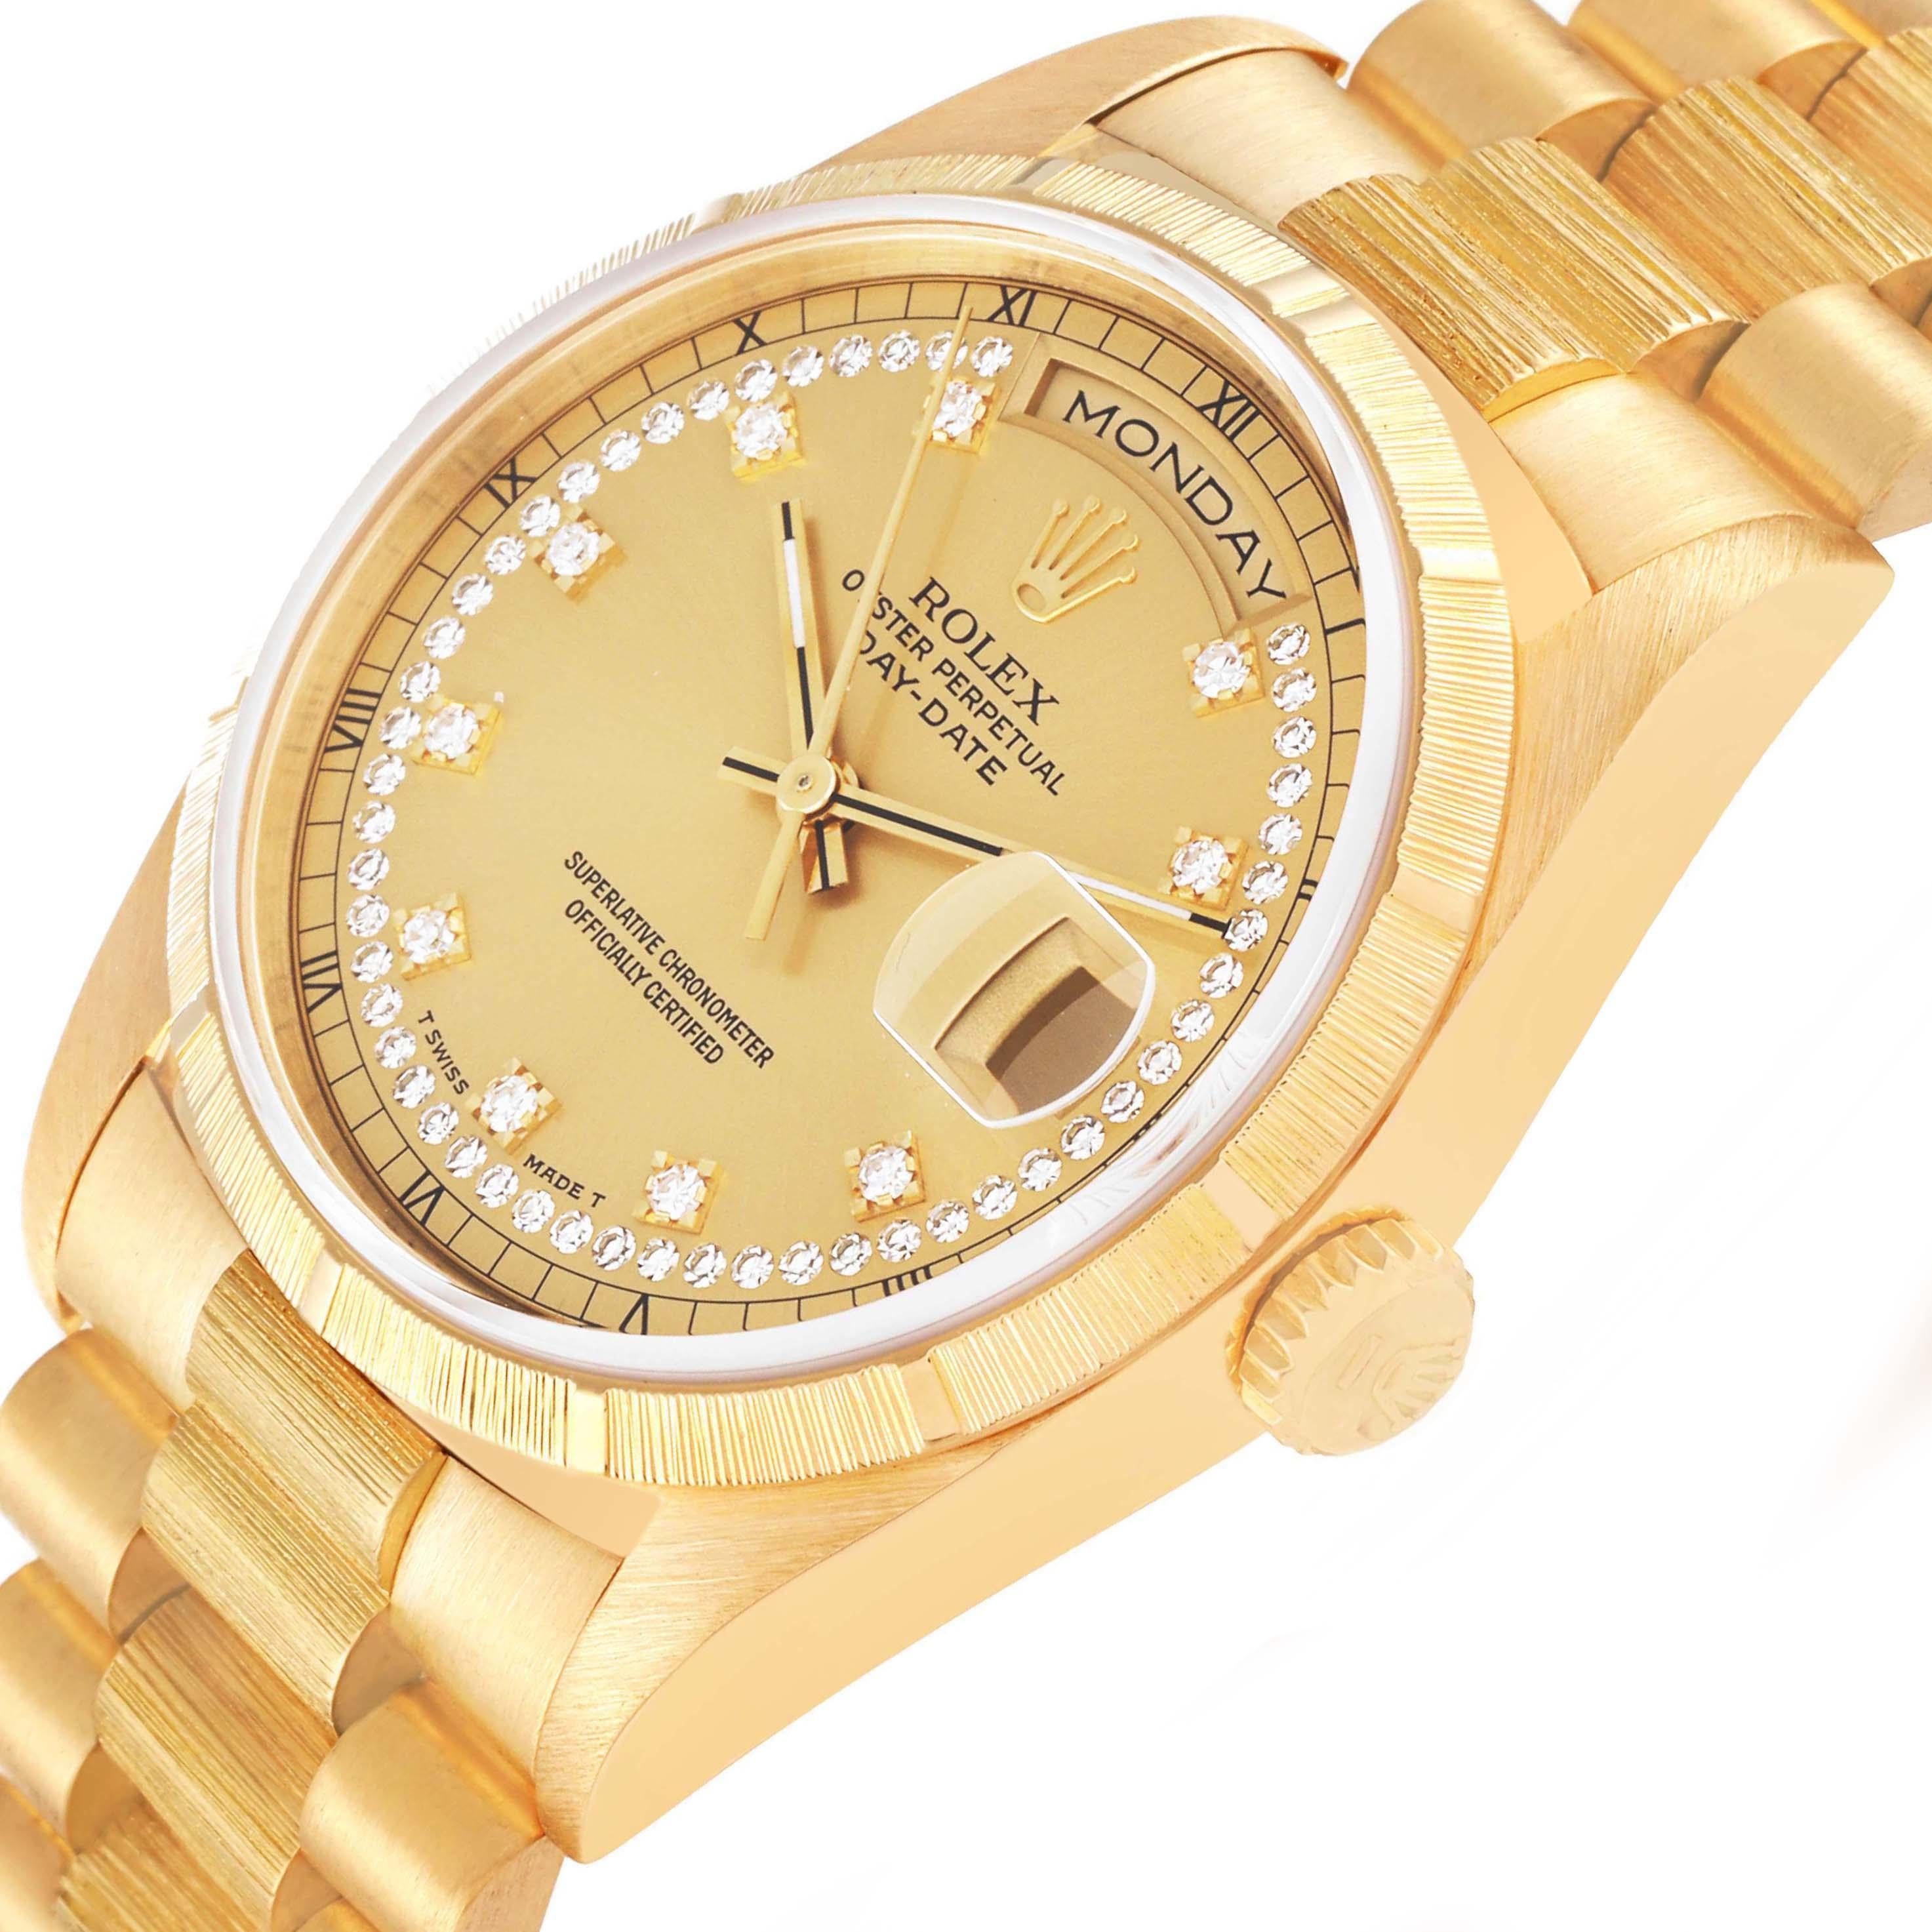 Rolex President Day-Date Yellow Gold Bark Diamond Dial Mens Watch 18248 For Sale 1